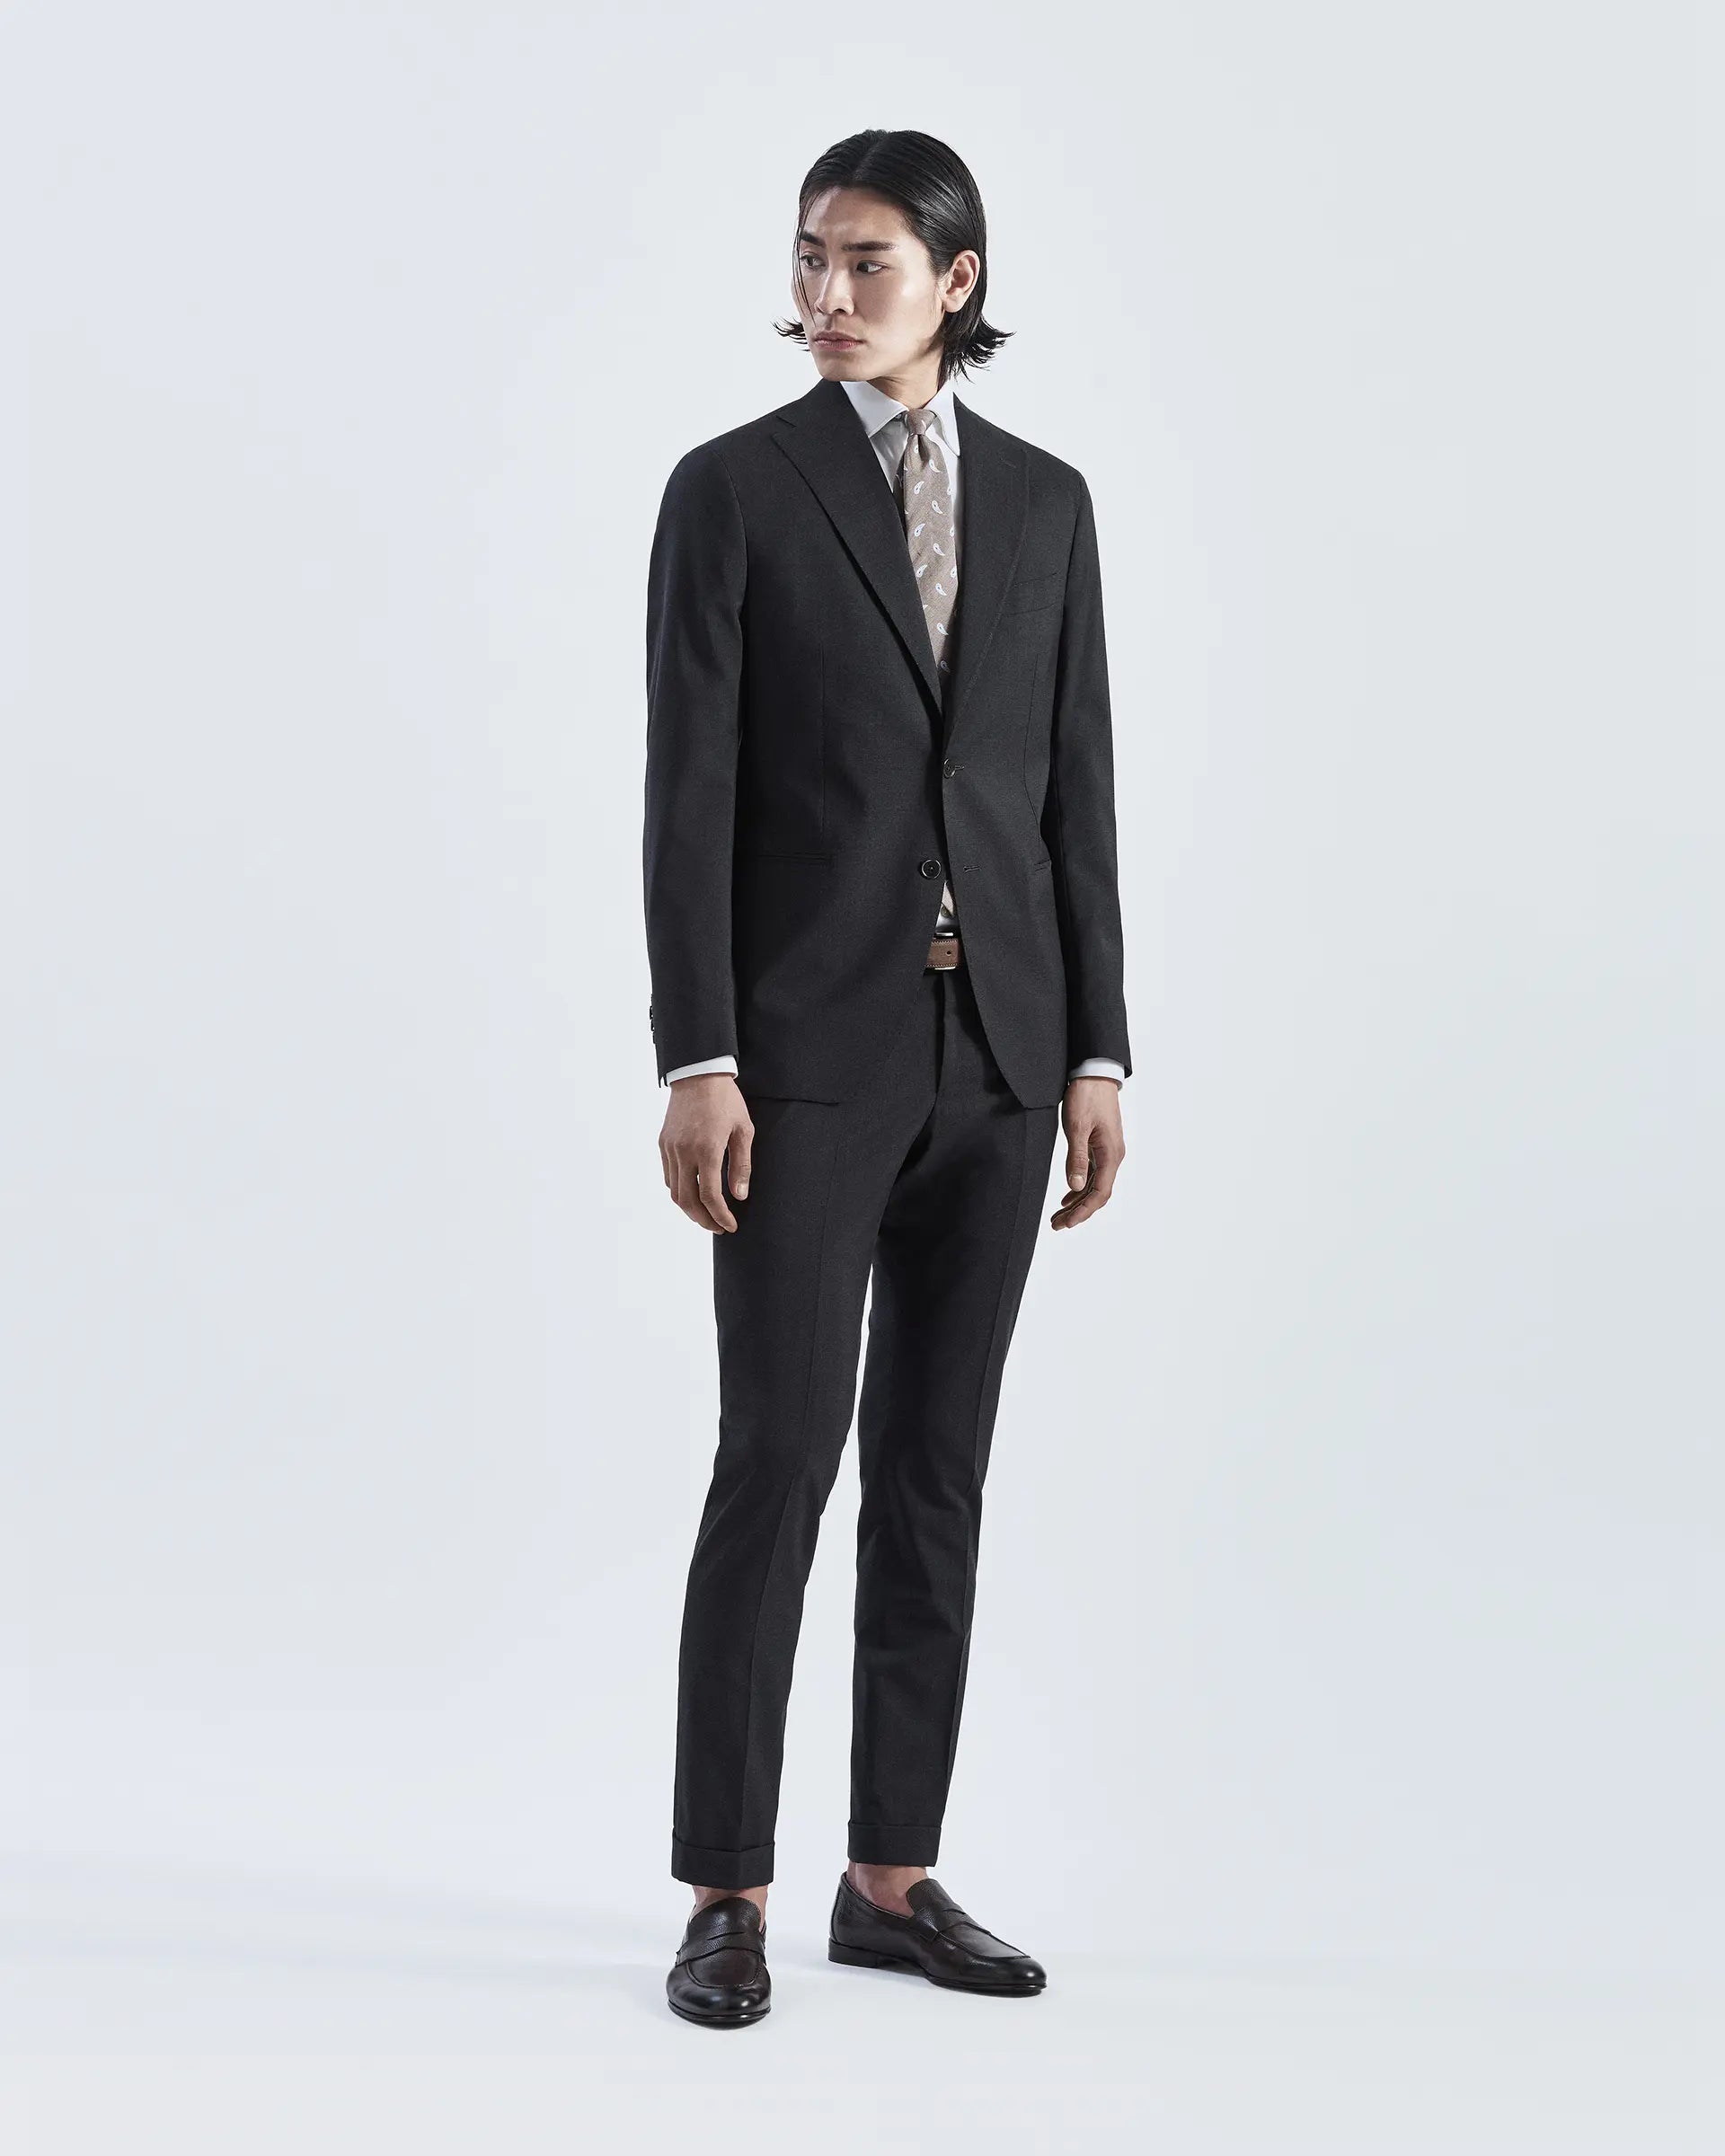 Anthracite suit in pure wool Tollegno fabric